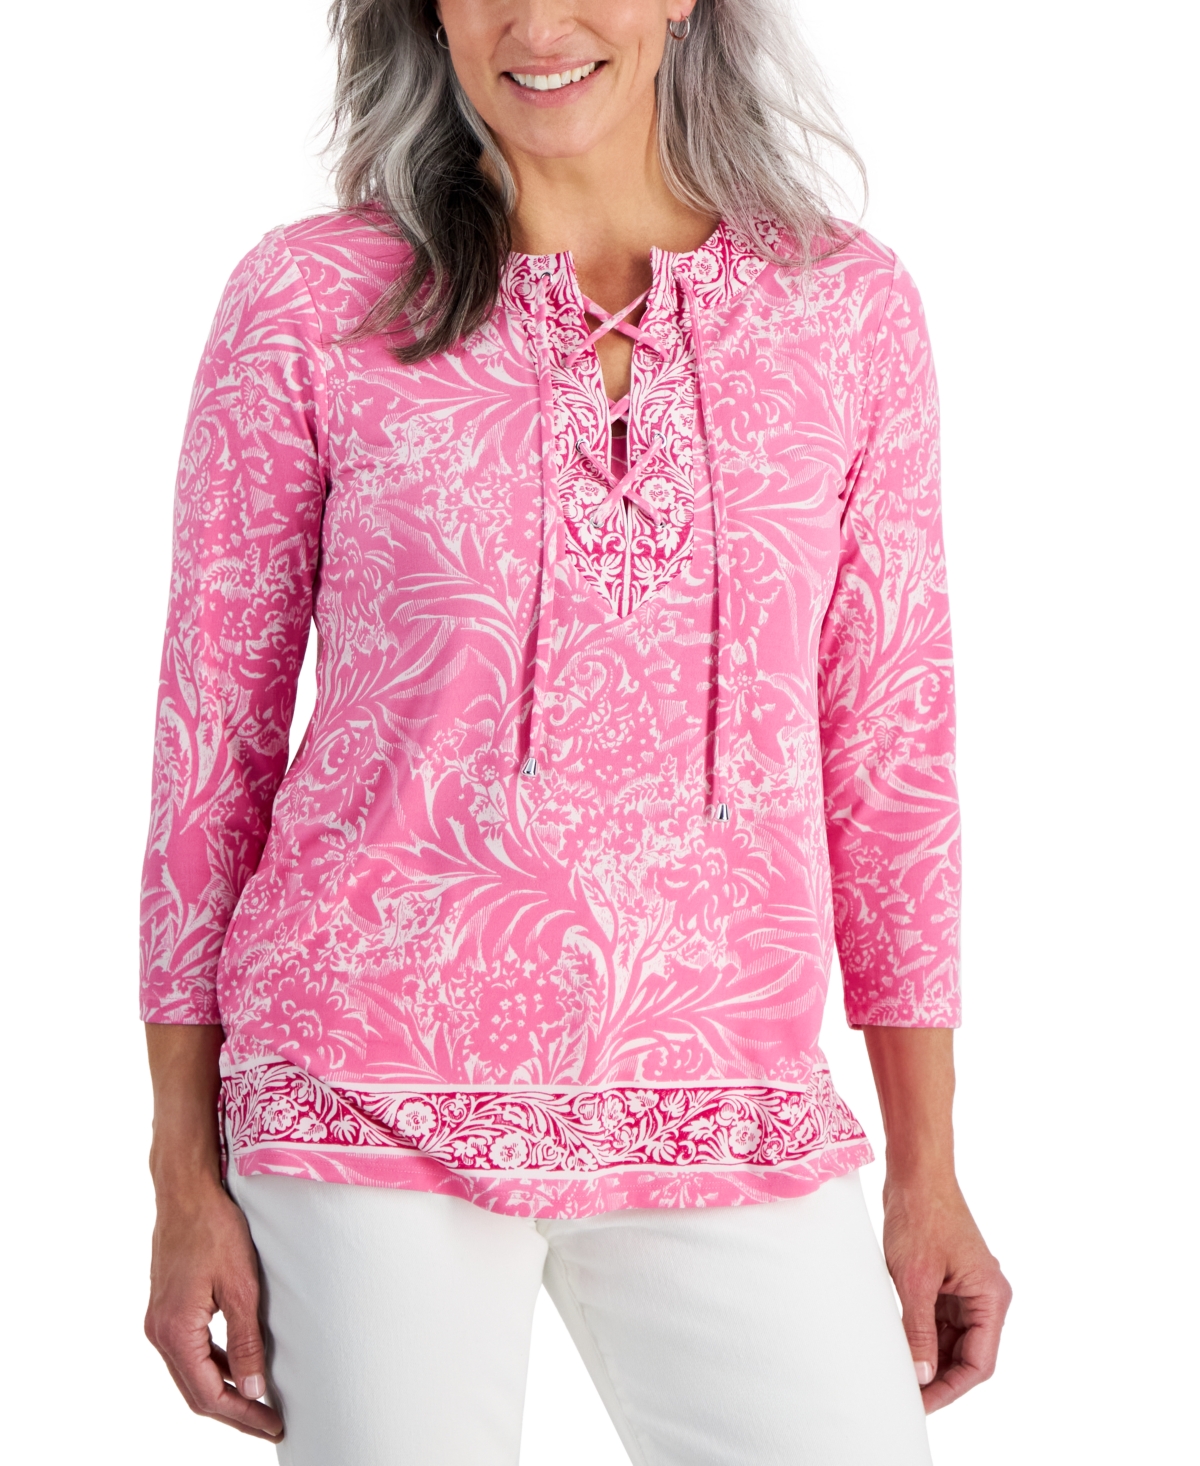 Petite Mixed-Print Lace-Up Knit Tunic, Created for Macy's - Blueberry Crisp Combo